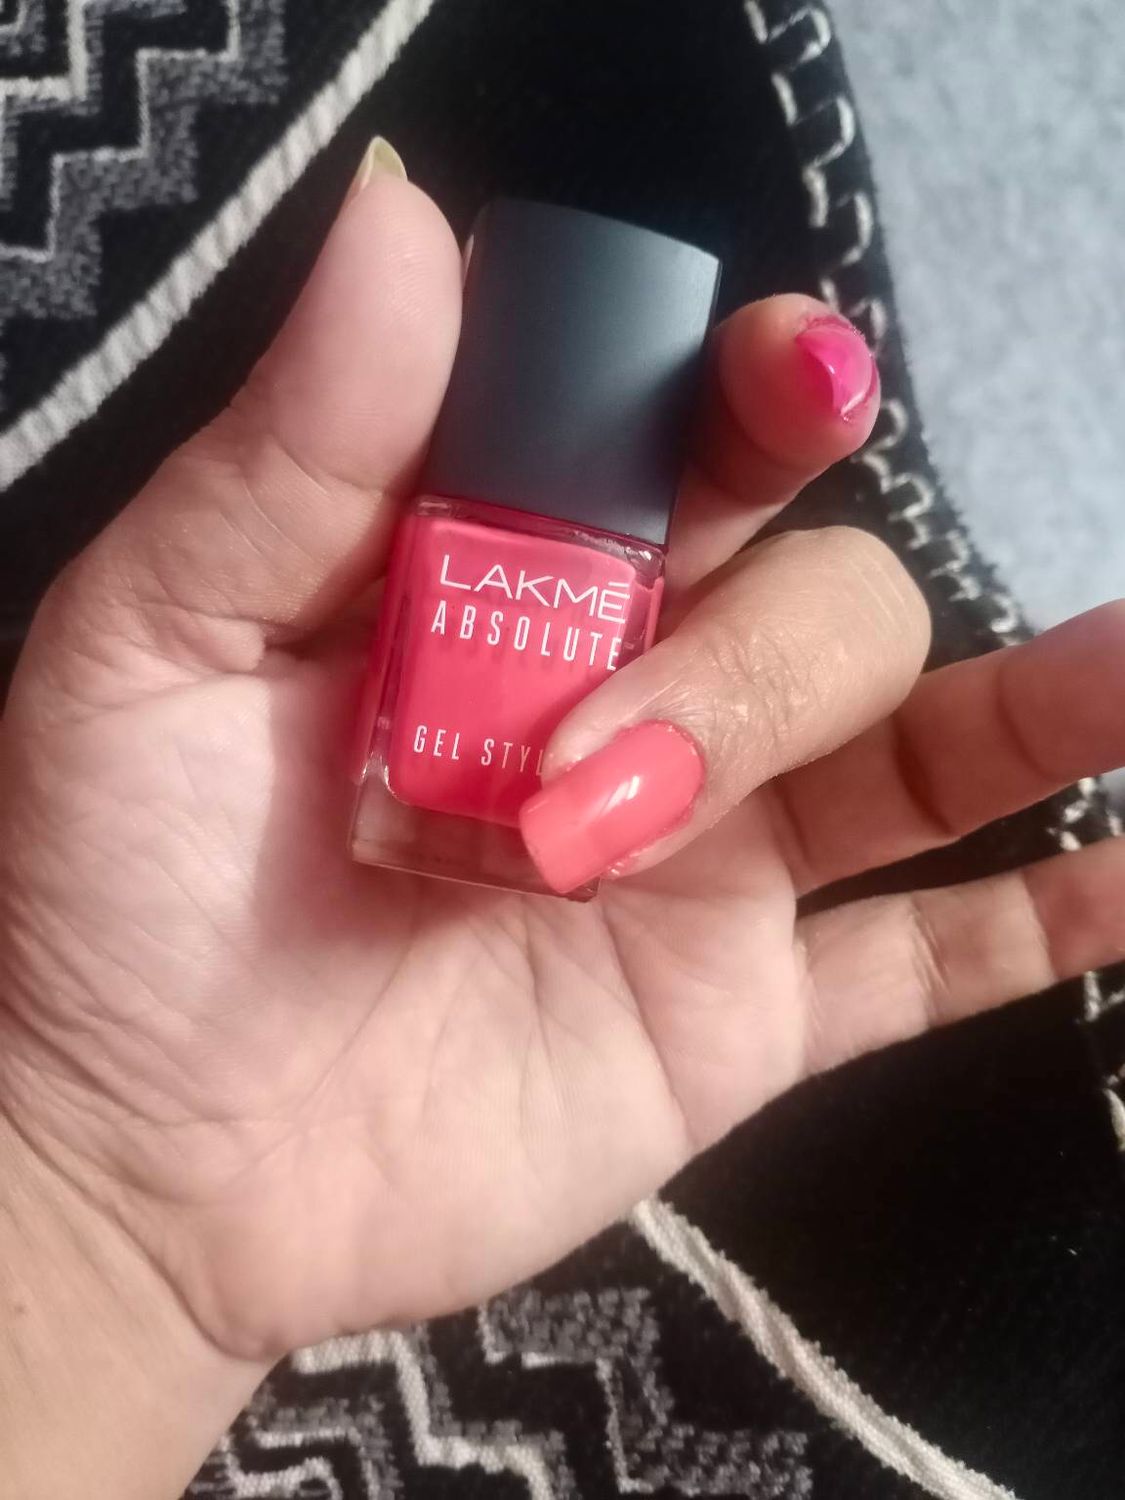 I Love Lakme - Life is not perfect, but your nails could be 💅😍​ Comment  below with 💖 if this color has your heart!​ ​Ft. Absolute Gel Stylist Nail  Color in the